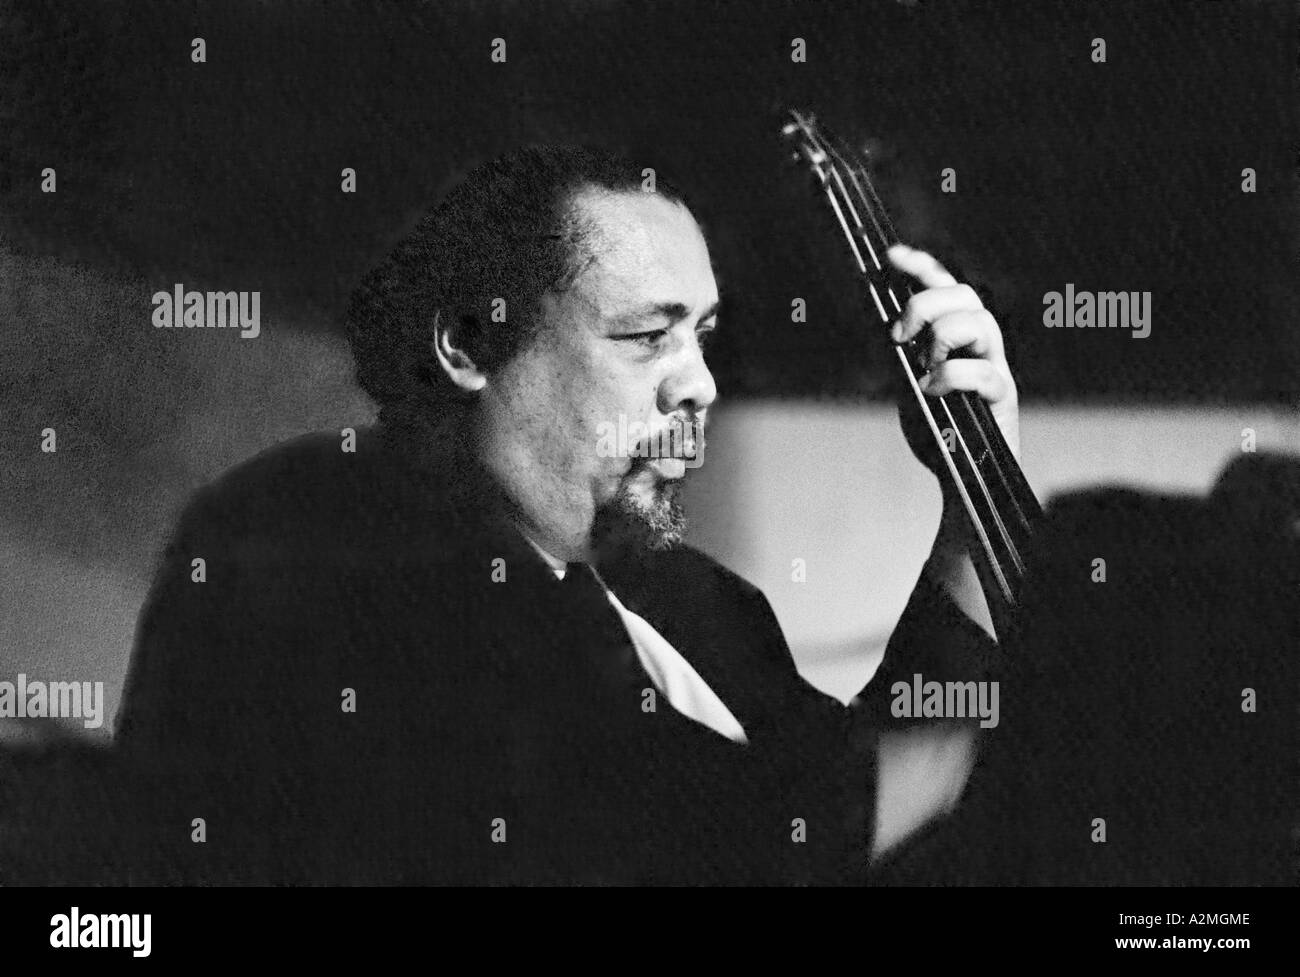 Charlie Mingus, double bass and piano playerband leader and composer playing at Ronnie Scotts club in Nov 1970, he died Jan 1979 Stock Photo